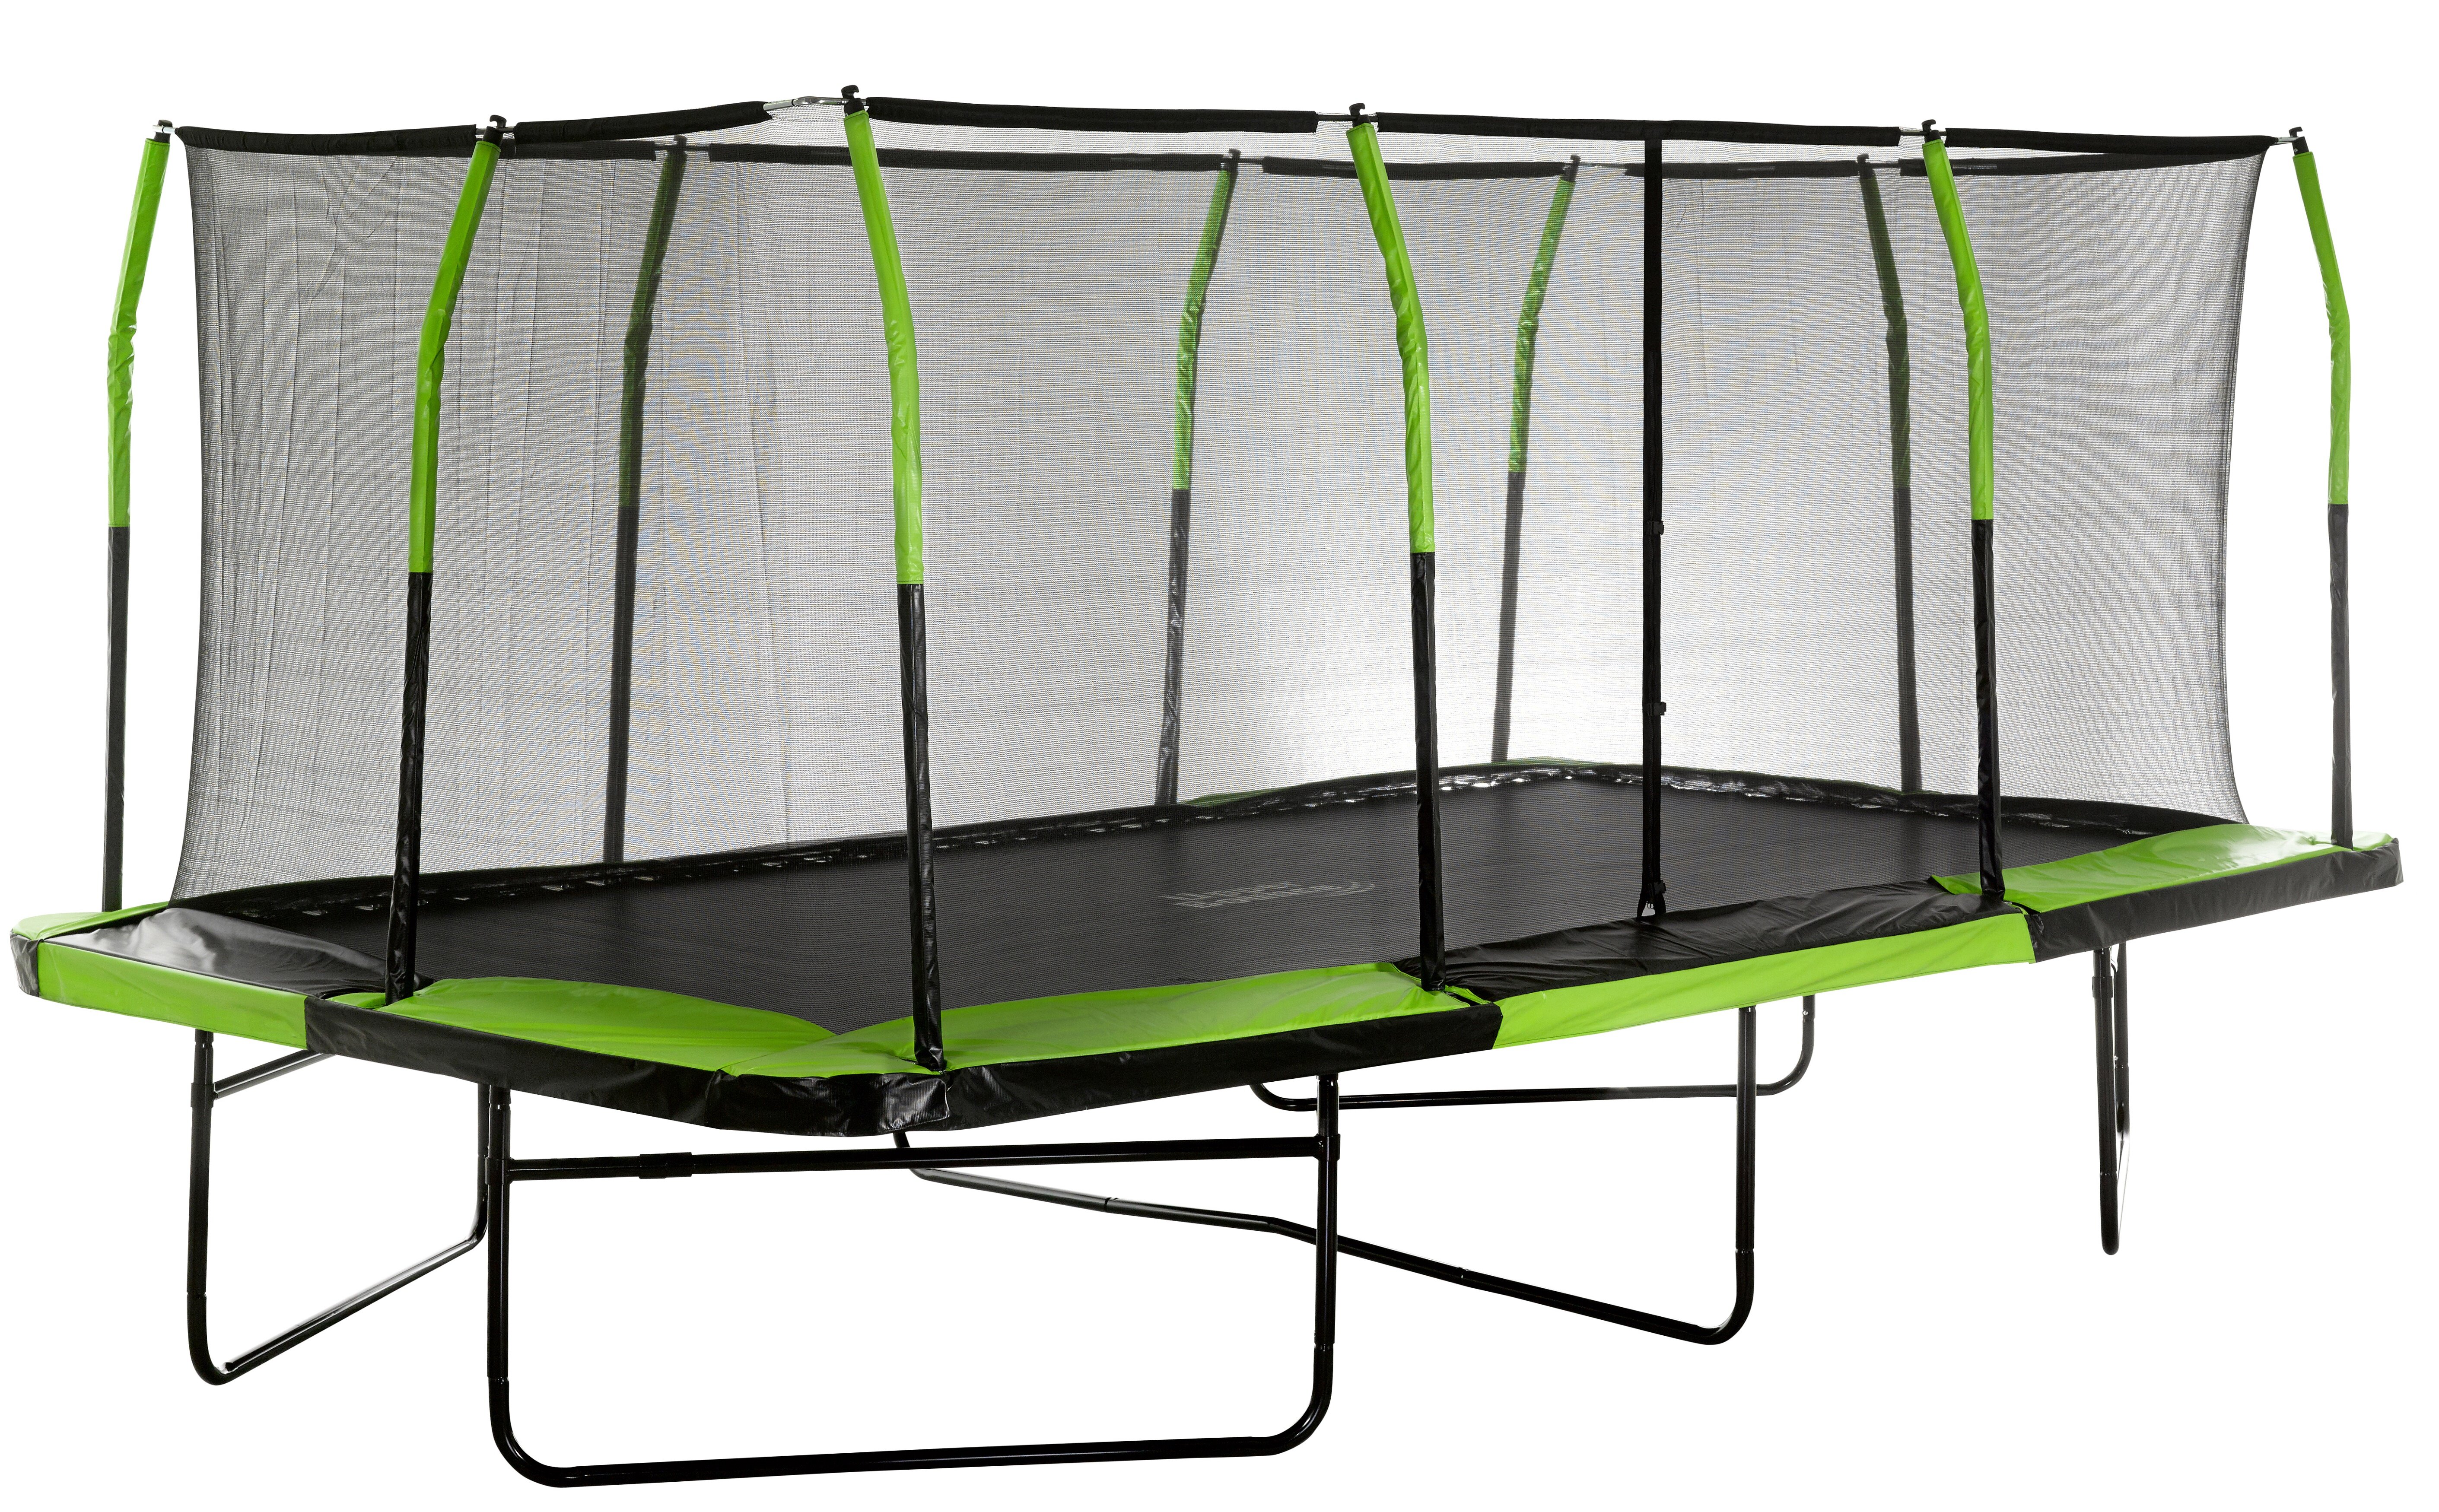 Machrus Upper Bounce 16 x 16 FT Square Trampoline Set with Premium Top-Ring  Enclosure and Safety Pad